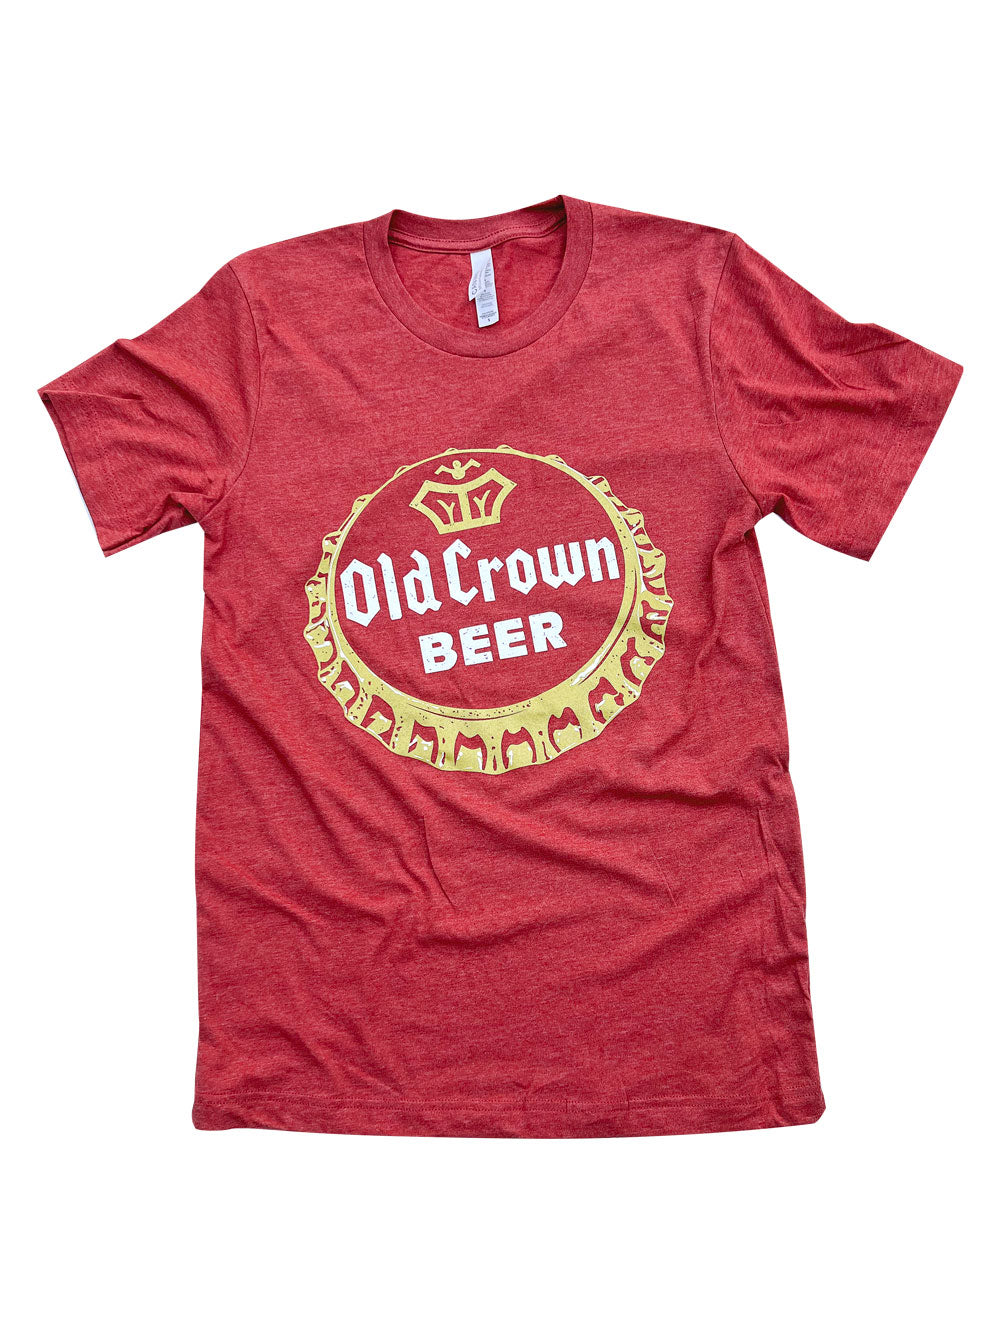 Old Crown Beer red heather t-shirt